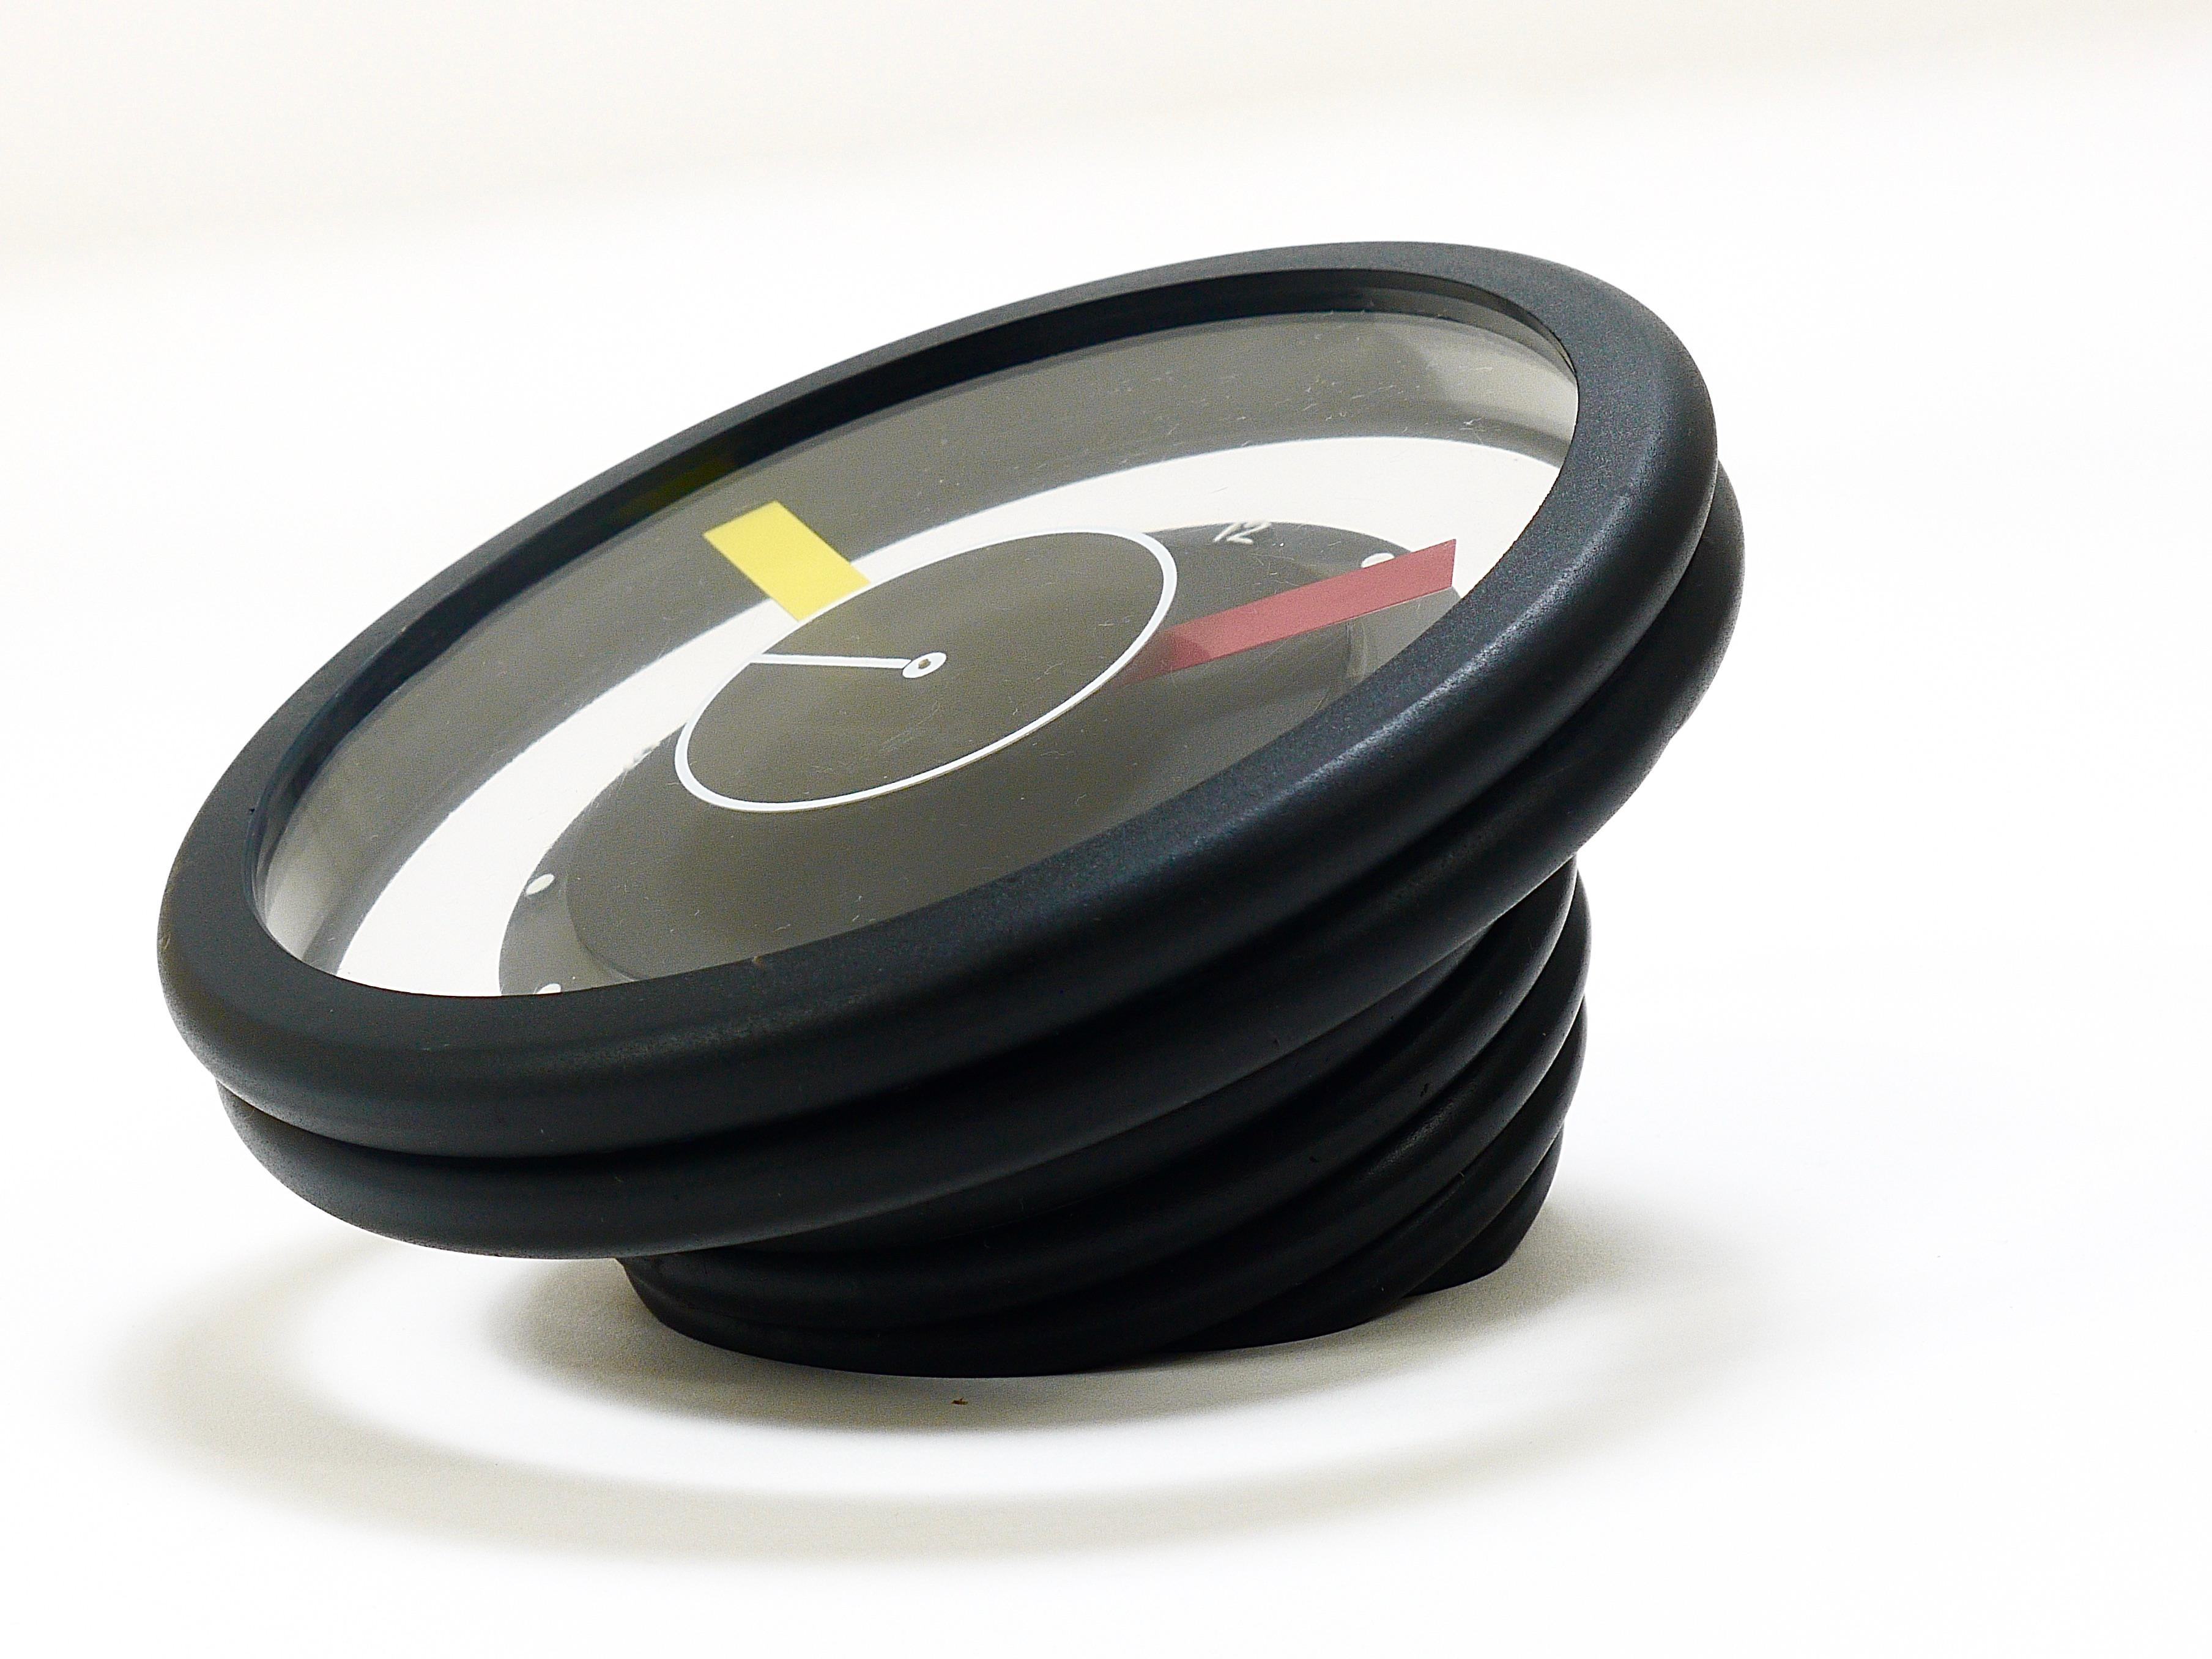 Postmodern Round Pop Art Desk or Table Clock, Memphis Milano Style, Italy, 1990s For Sale 8